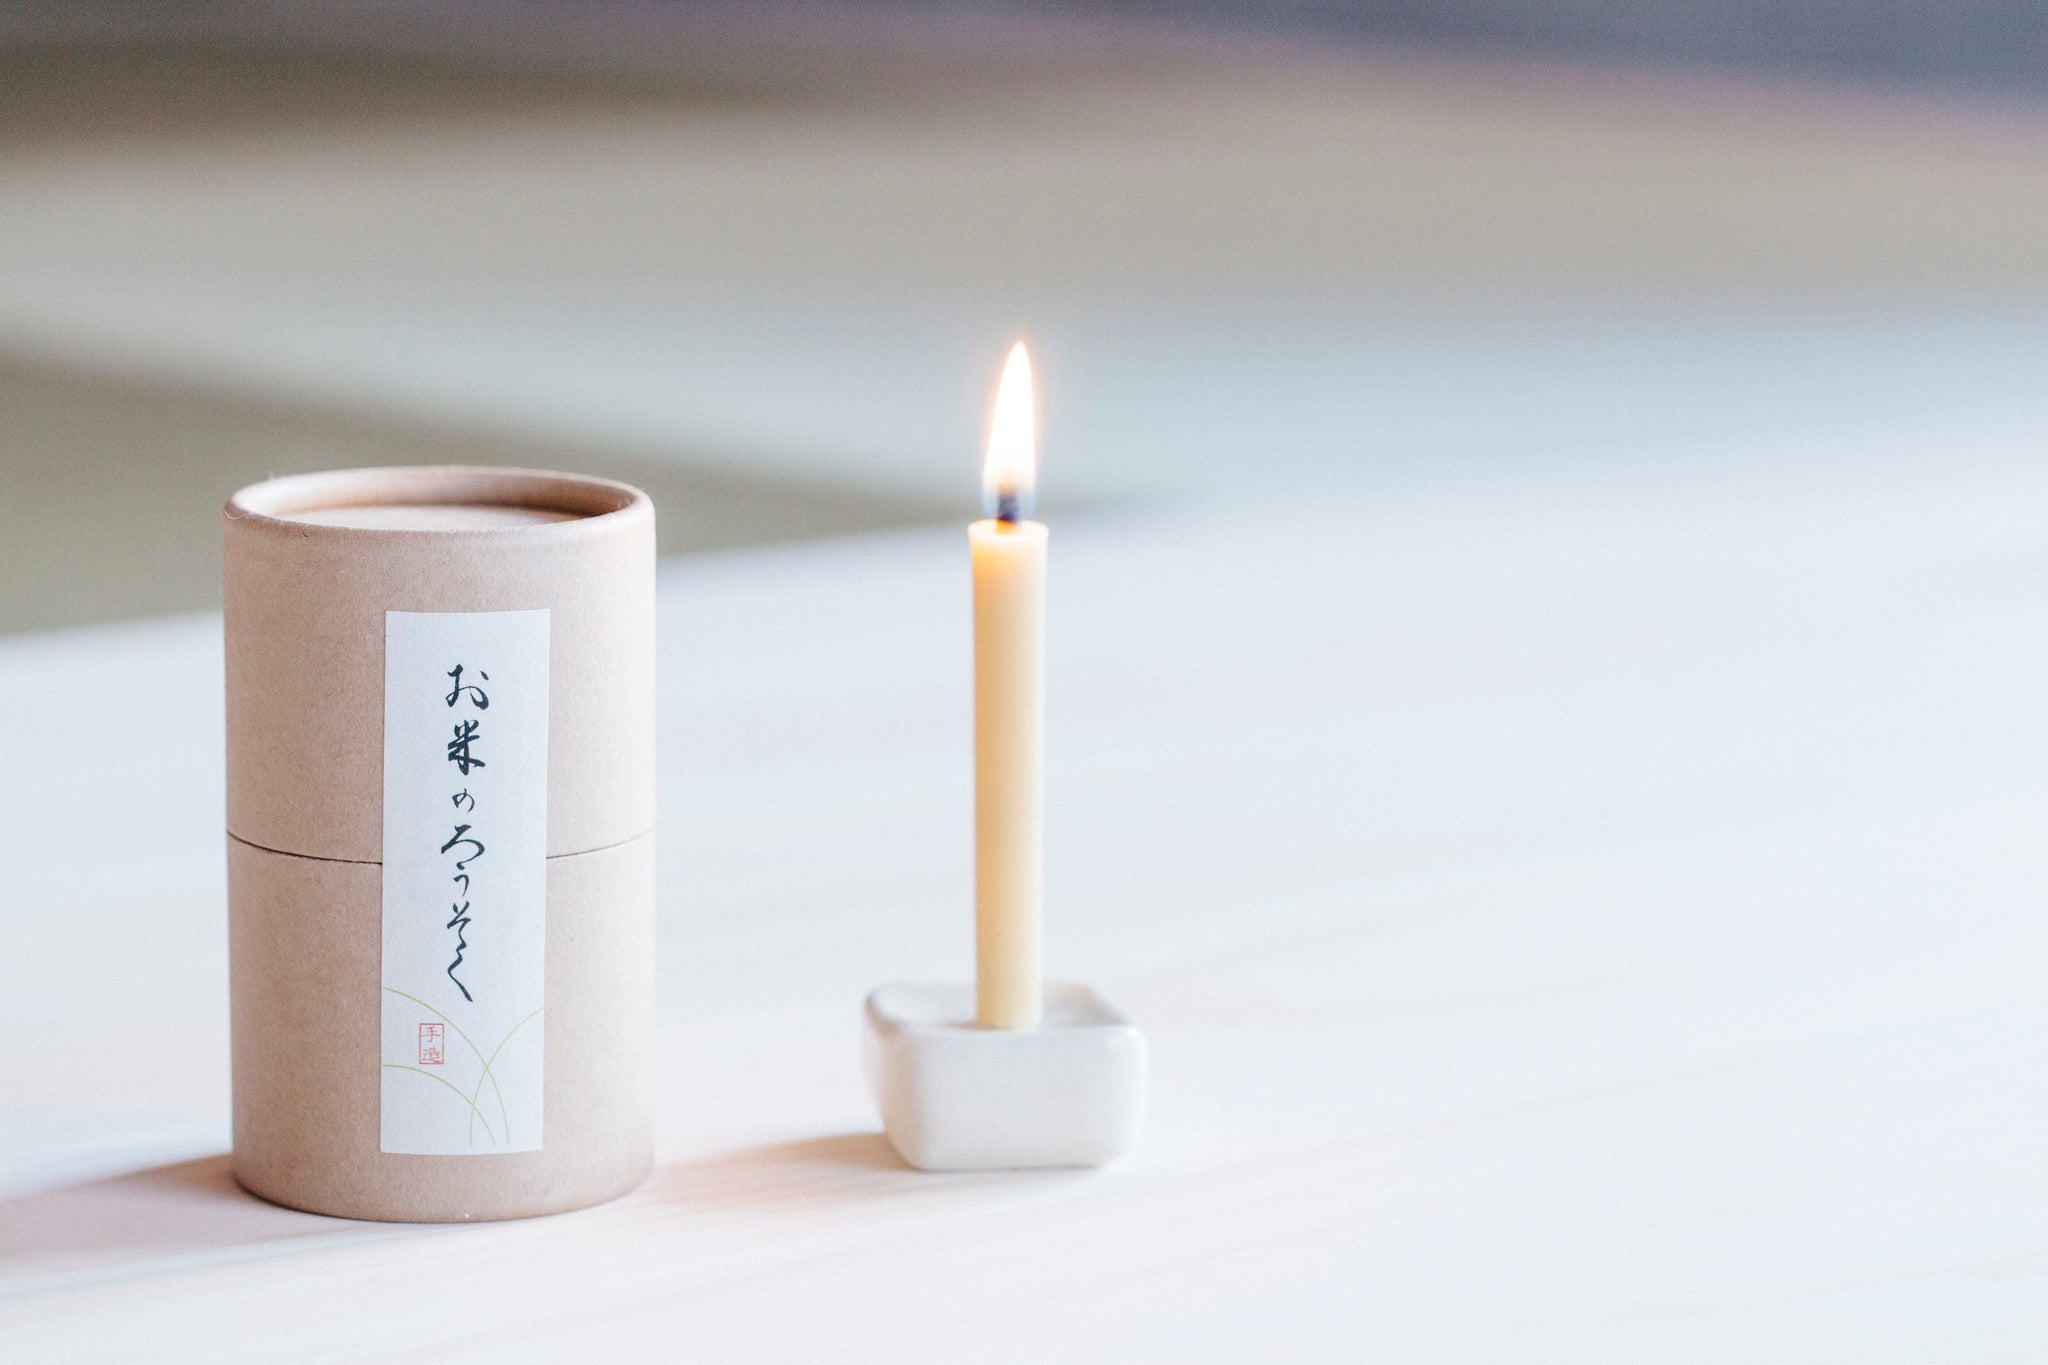 A lit rice wax candle next to a box of rice wax candles